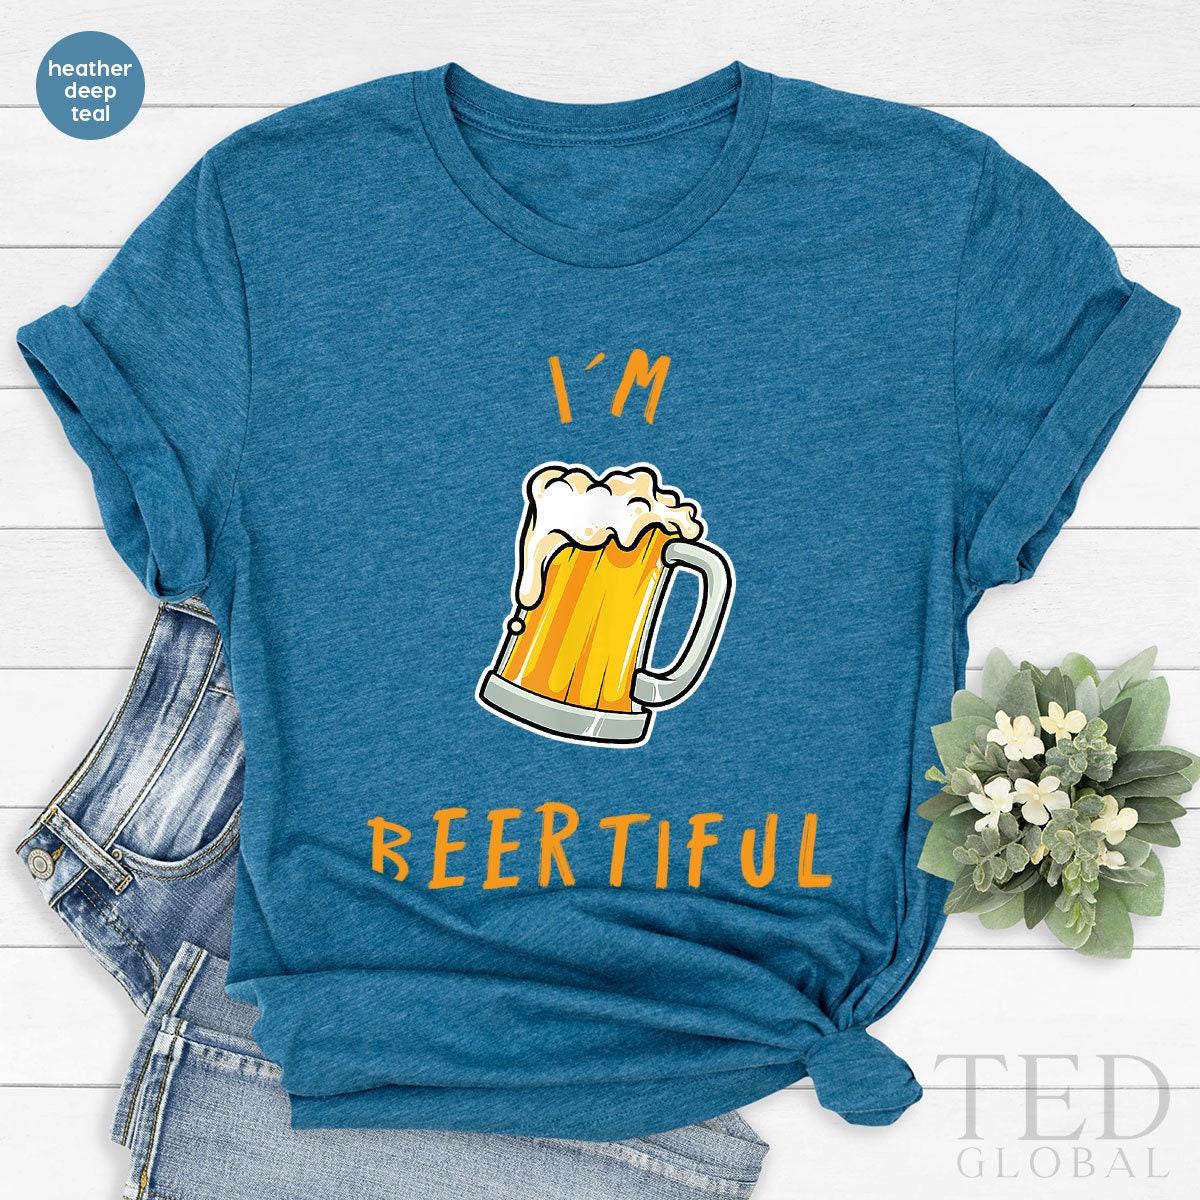 Cute Drinker T-Shirt, I'm Beertiful T Shirt, Beer Lover Tee, Drinking Day Shirts, Weekend Party Shirt, Funny Alcohol TShirt, Gift For Barmen - Fastdeliverytees.com